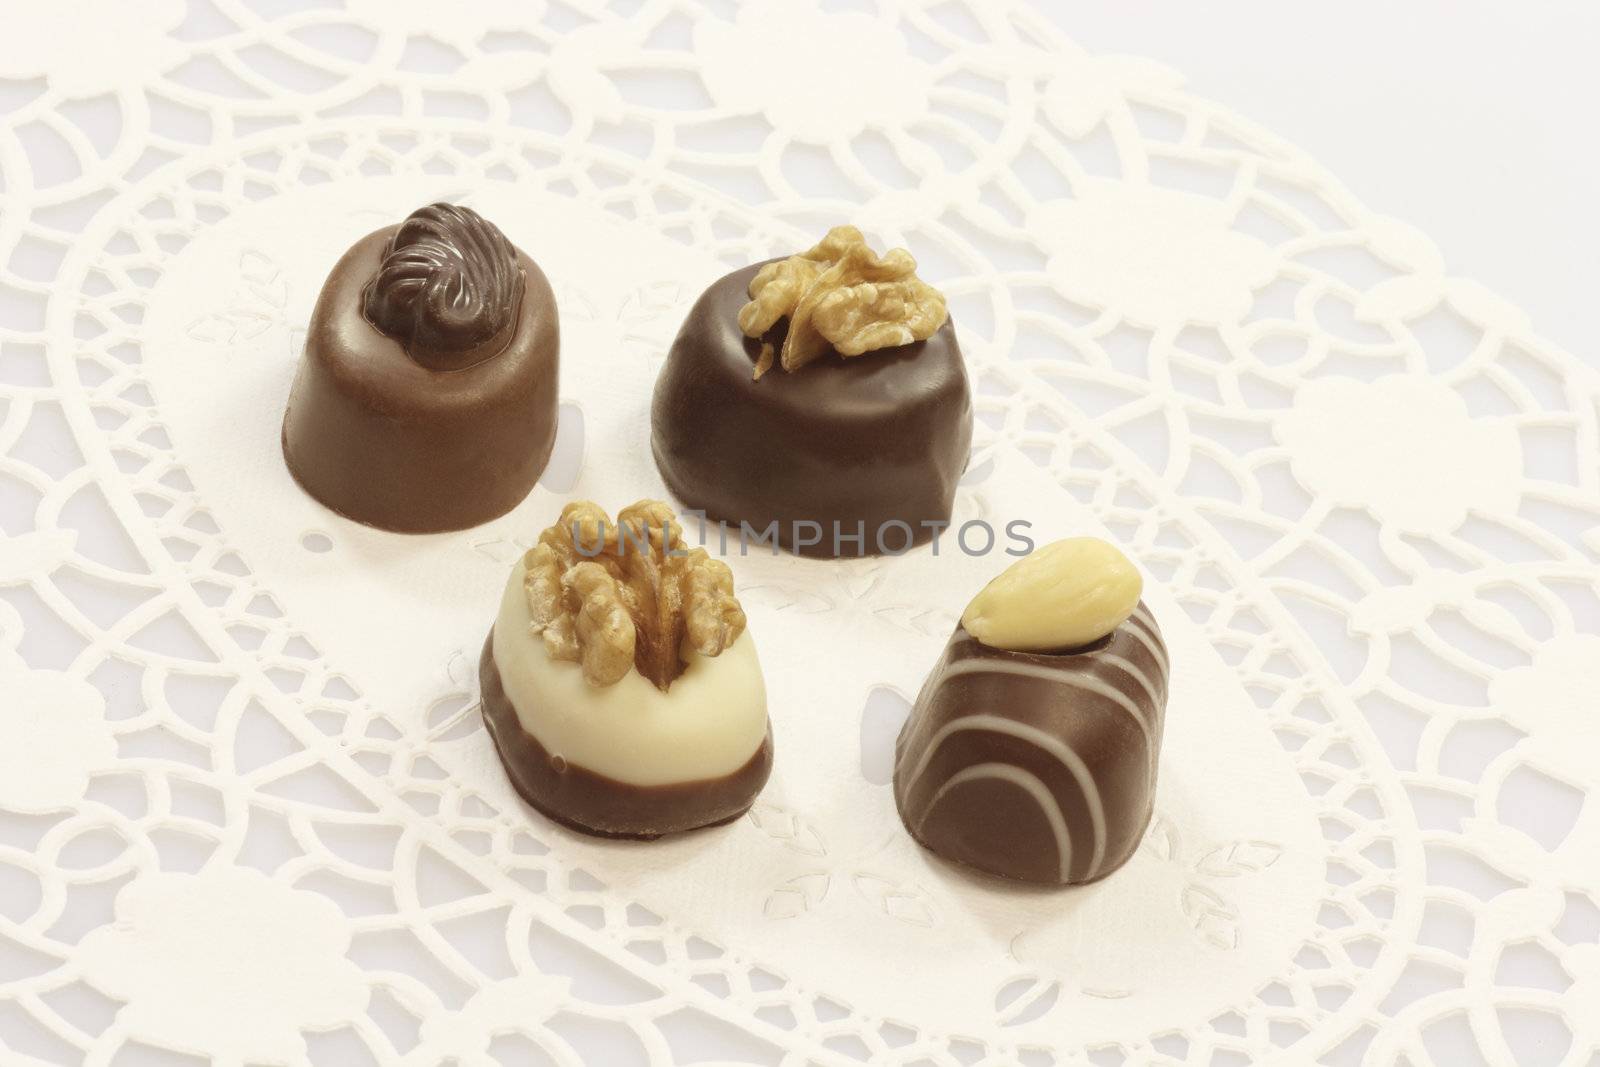 Four tasty chocolates with nuts